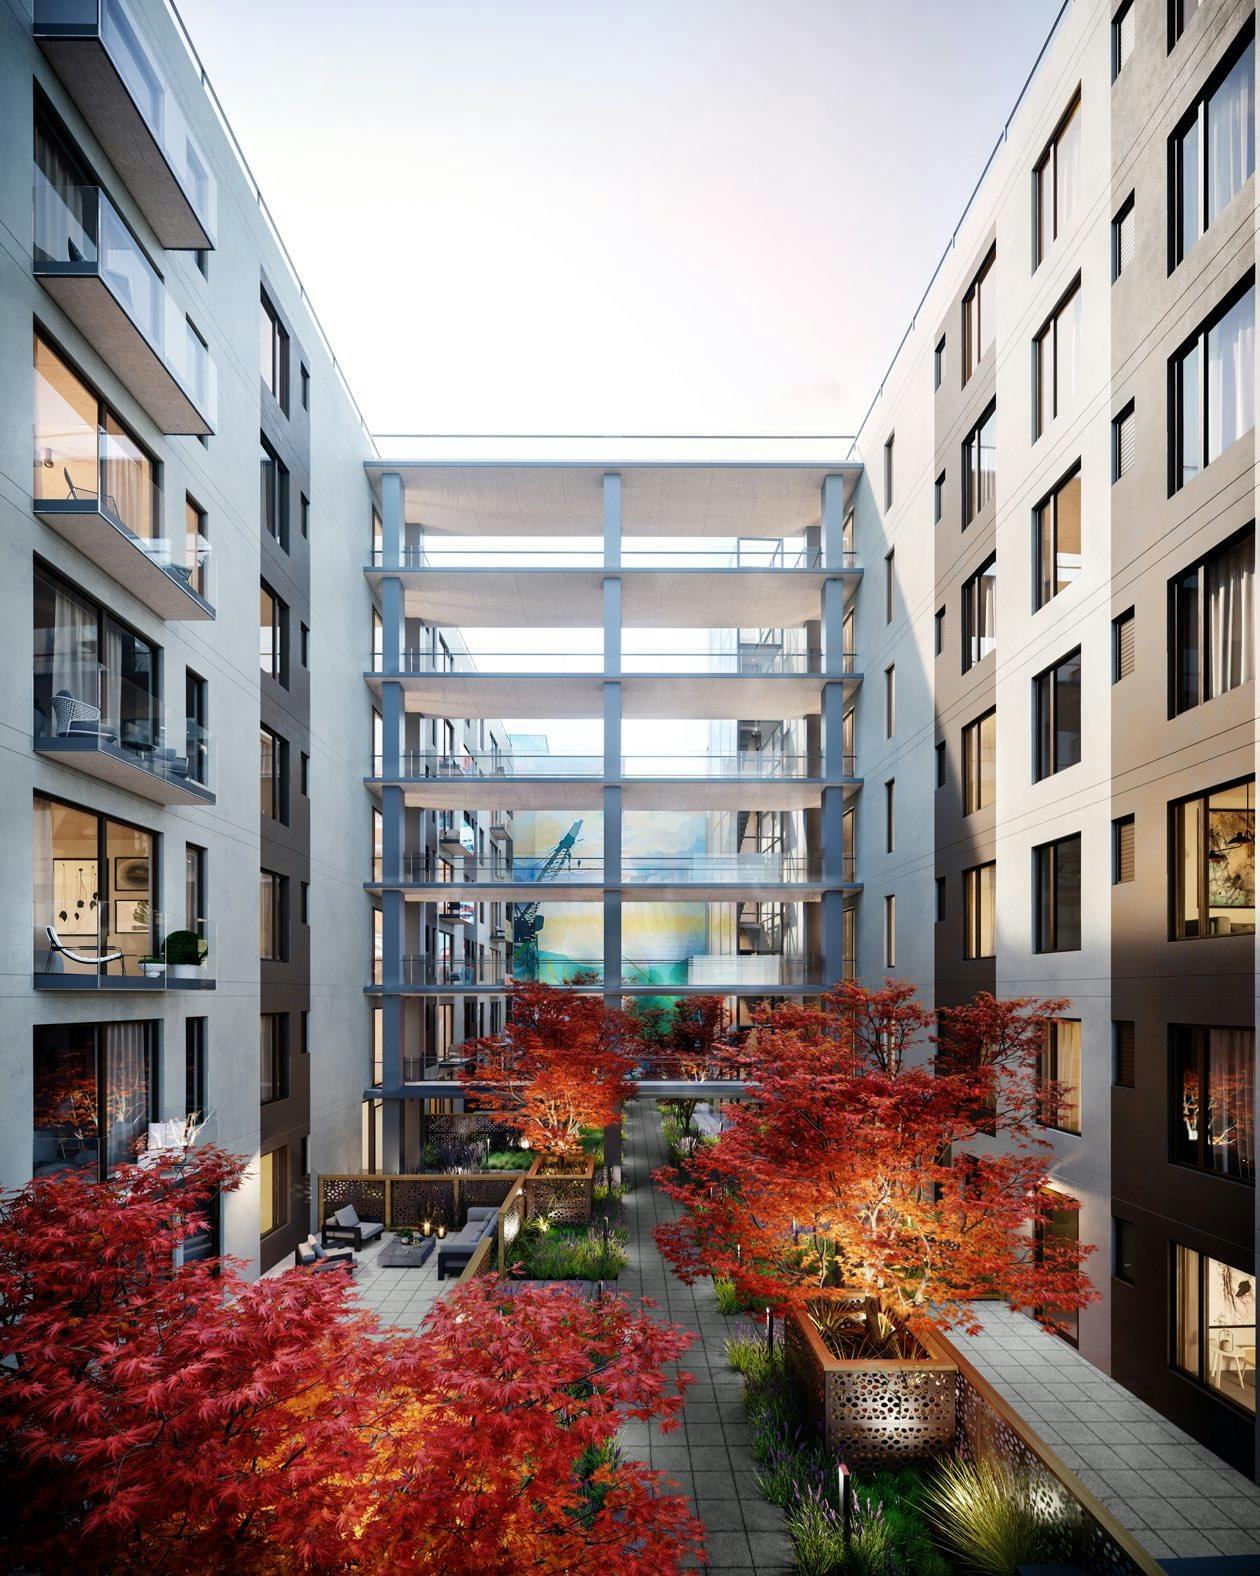 Residences at 2177 Third not only have views of the city and the bay, but also may look down into a immaculately landscaped courtyard with a meticulously curated aesthetic. 